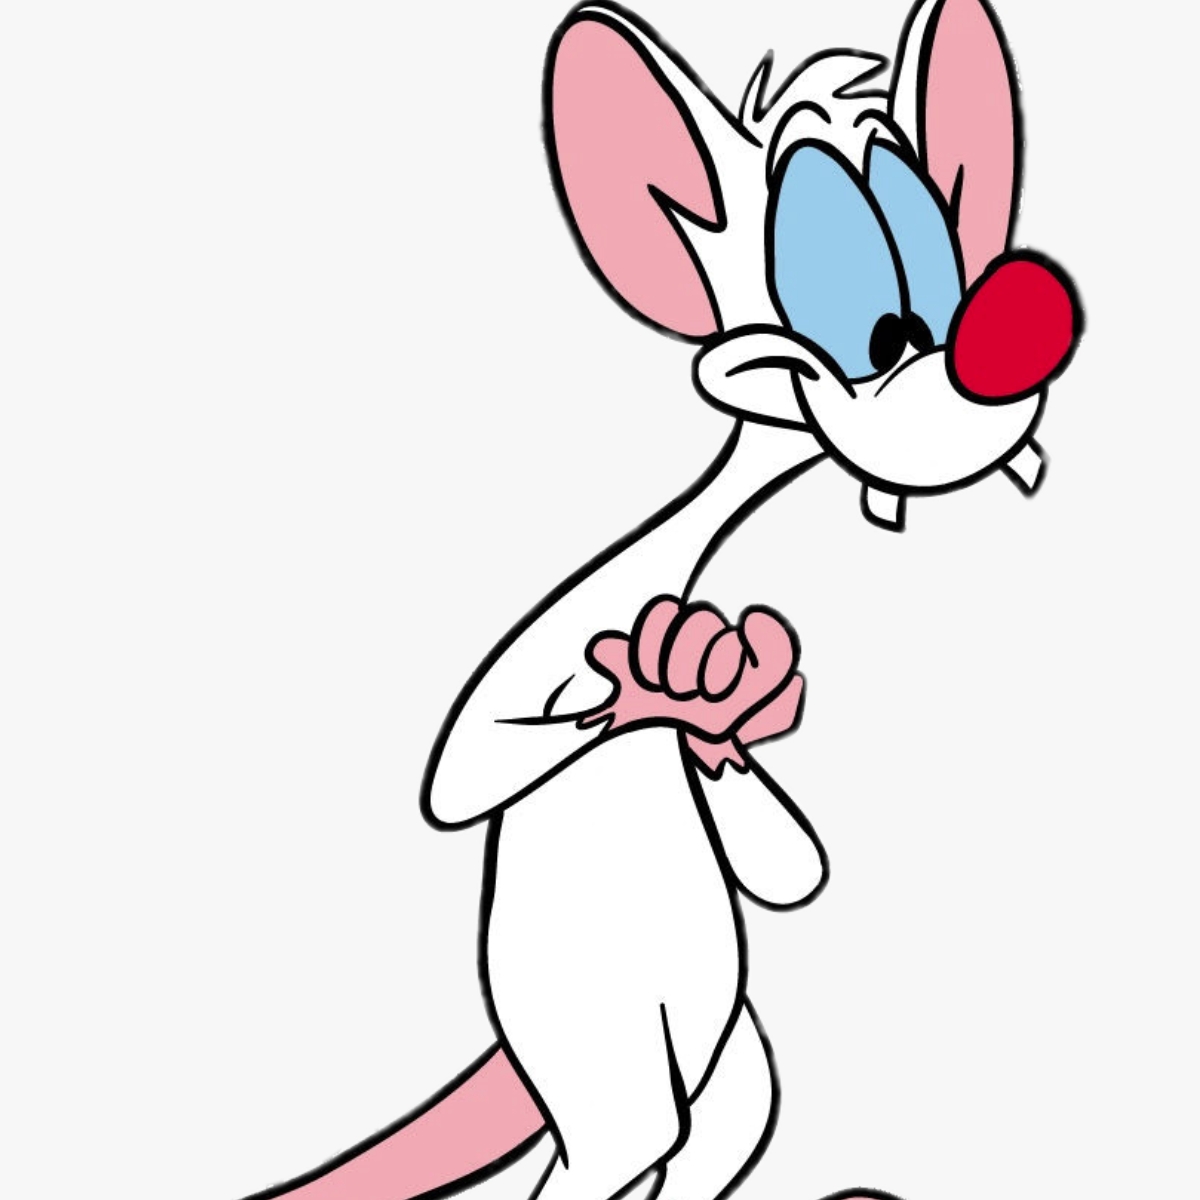 14-facts-about-pinky-pinky-and-the-brain